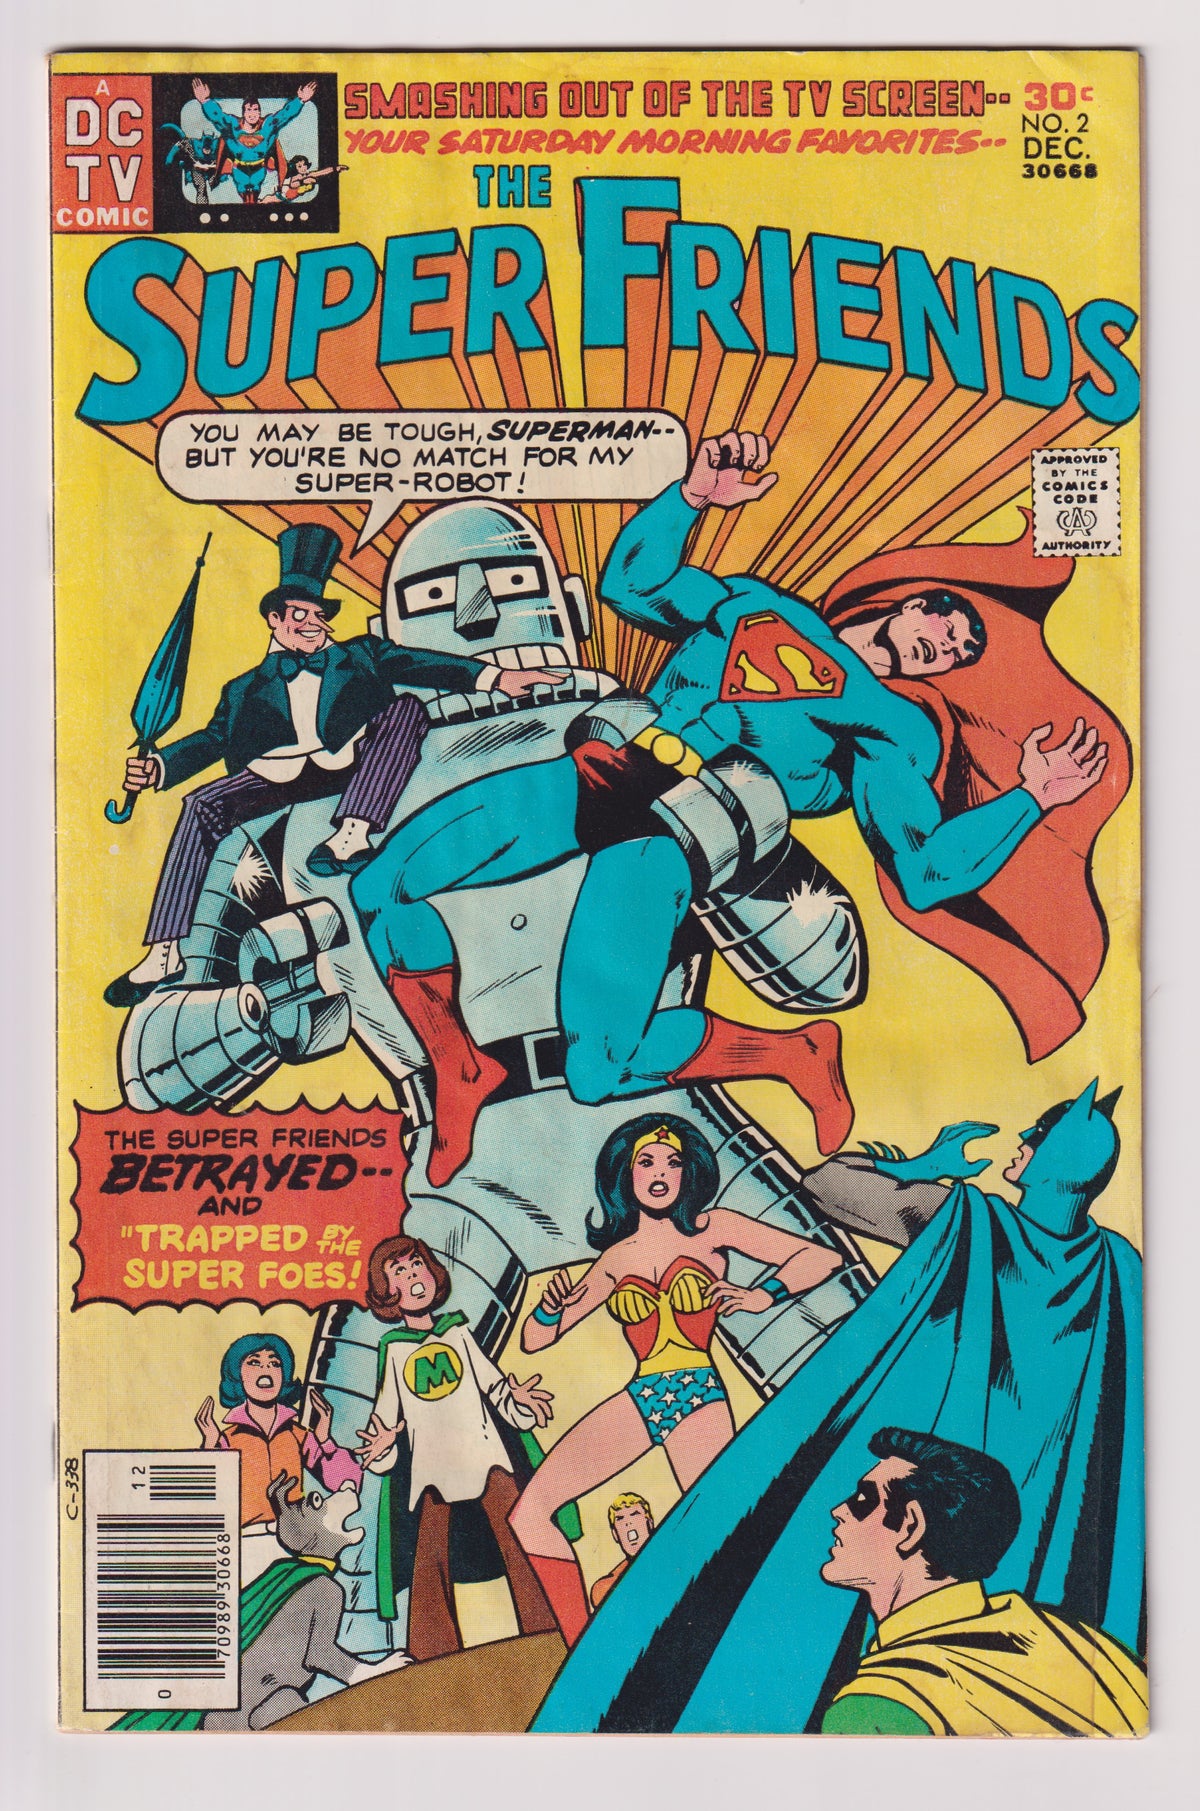 Photo of Super Friends, Vol. 1 (1976)  Iss 2 Very Good +  Comic sold by Stronghold Collectibles